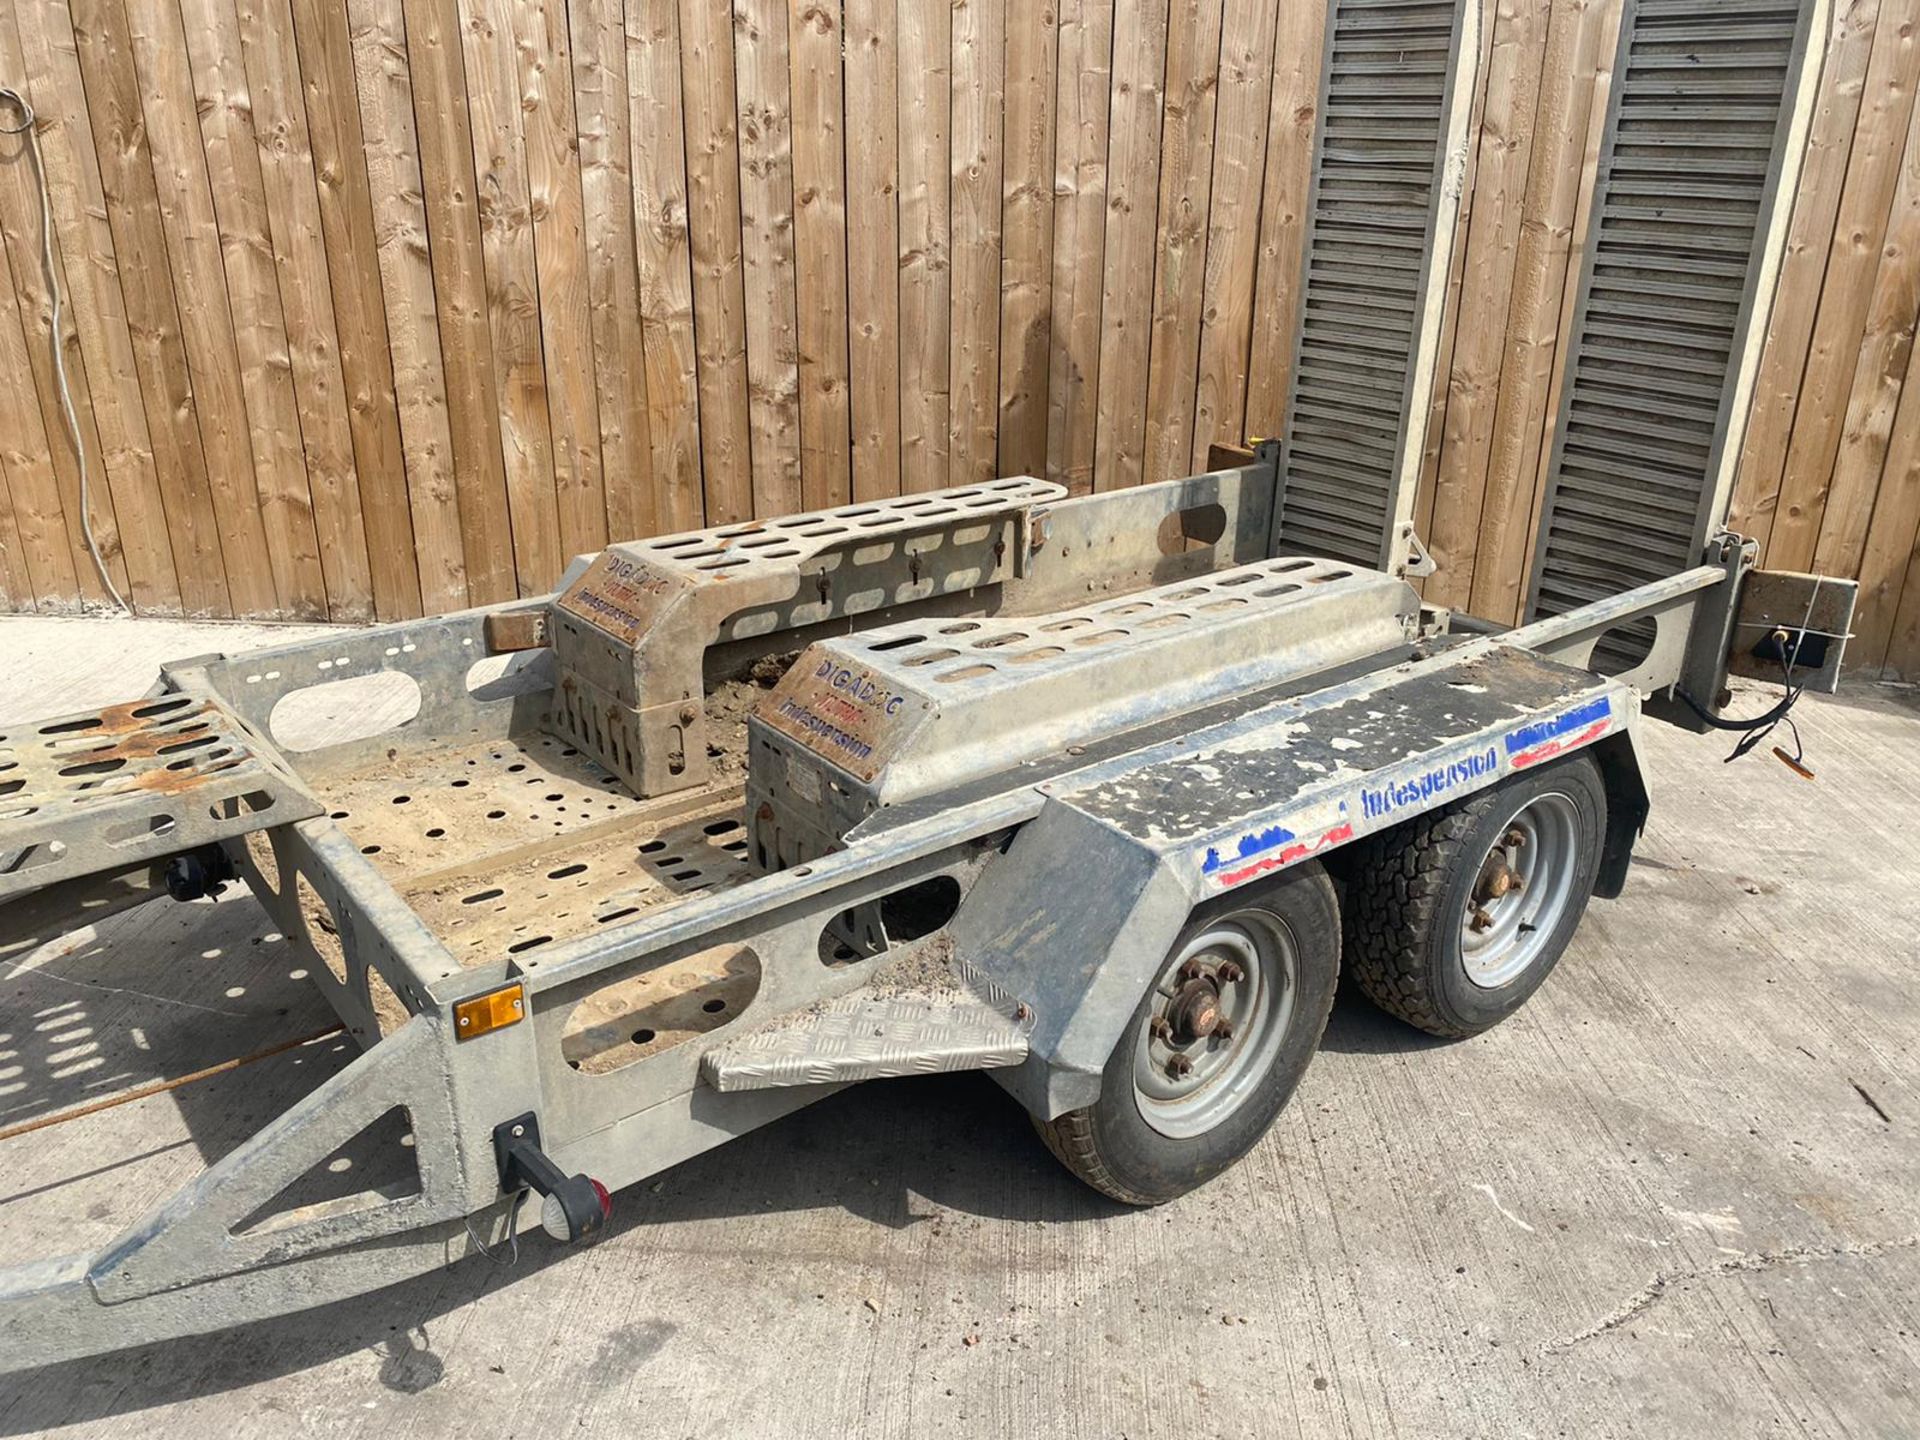 2017 INDESPENSION PLANT MINI DIGGER  TRAILER.LOCATION NORTH YORKSHIRE. - Image 6 of 6